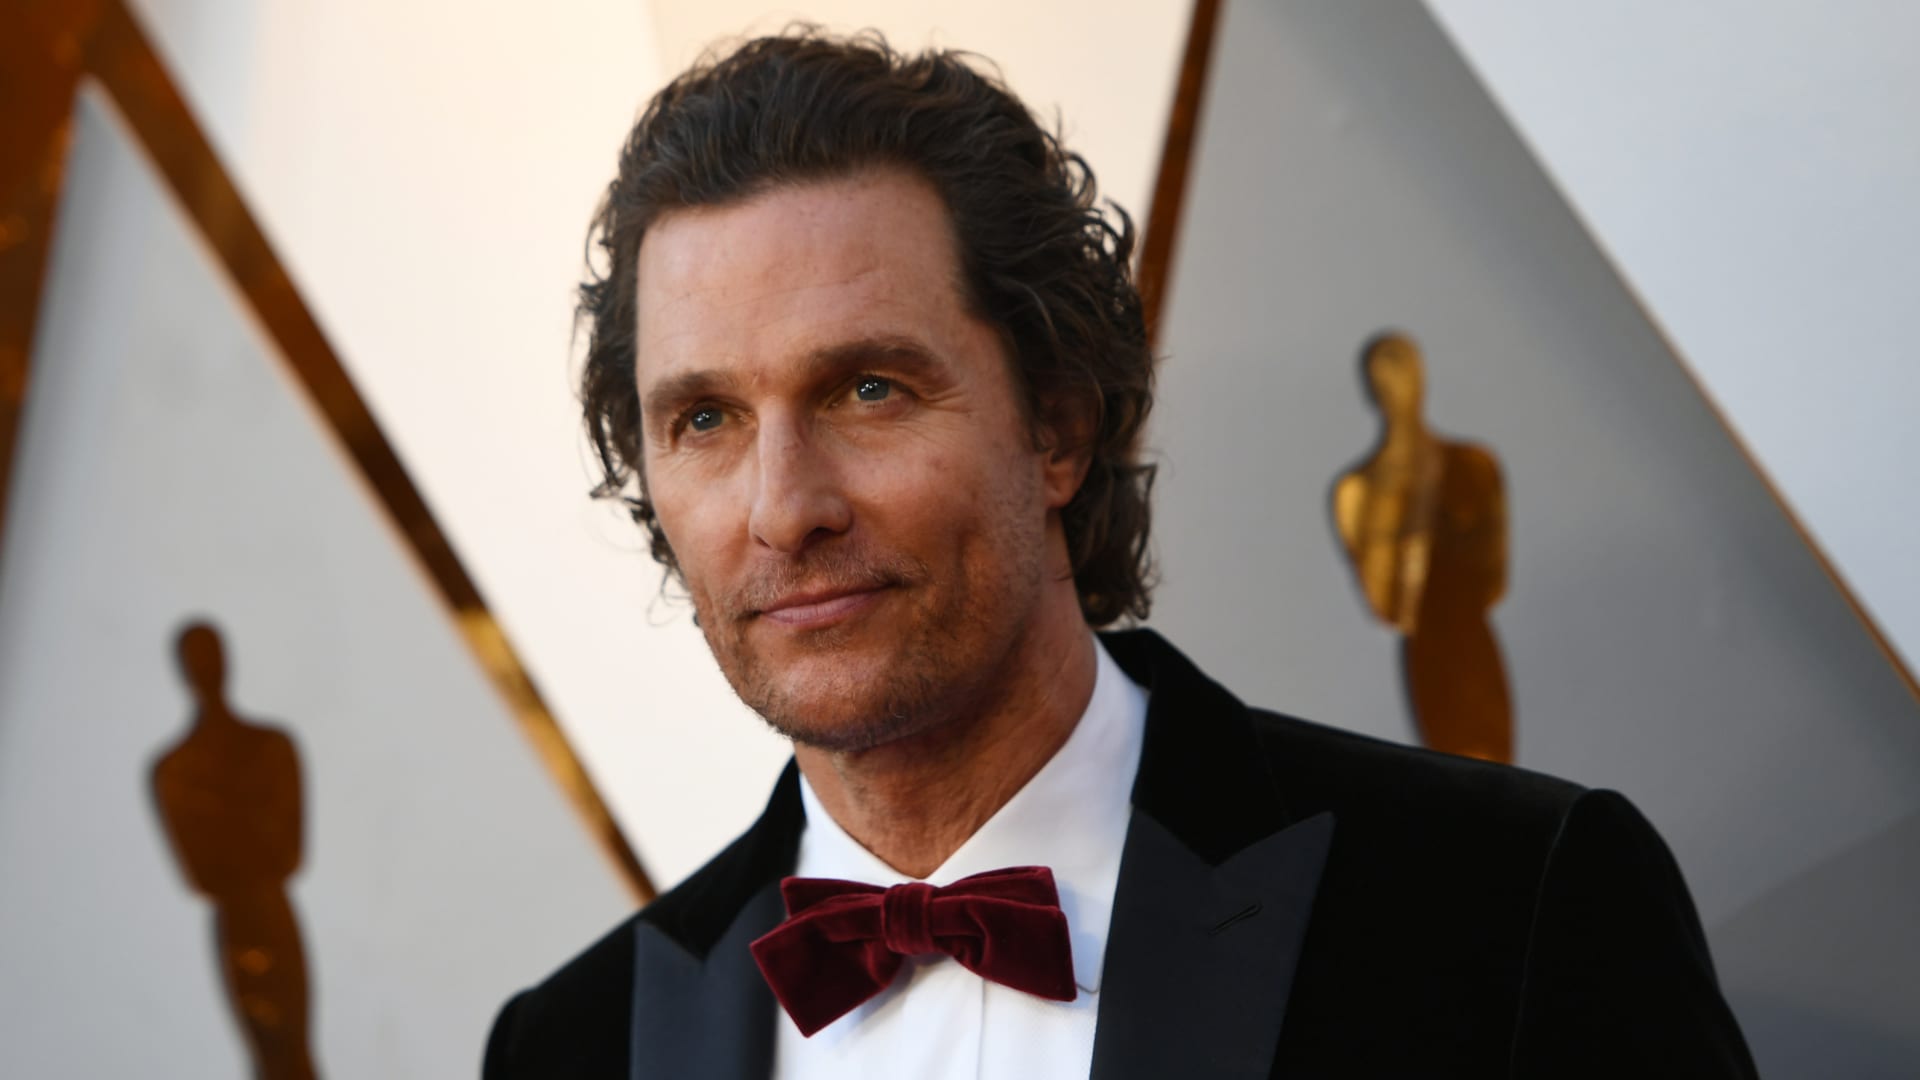 Watch live: Actor Matthew McConaughey joins White House press briefing on guns